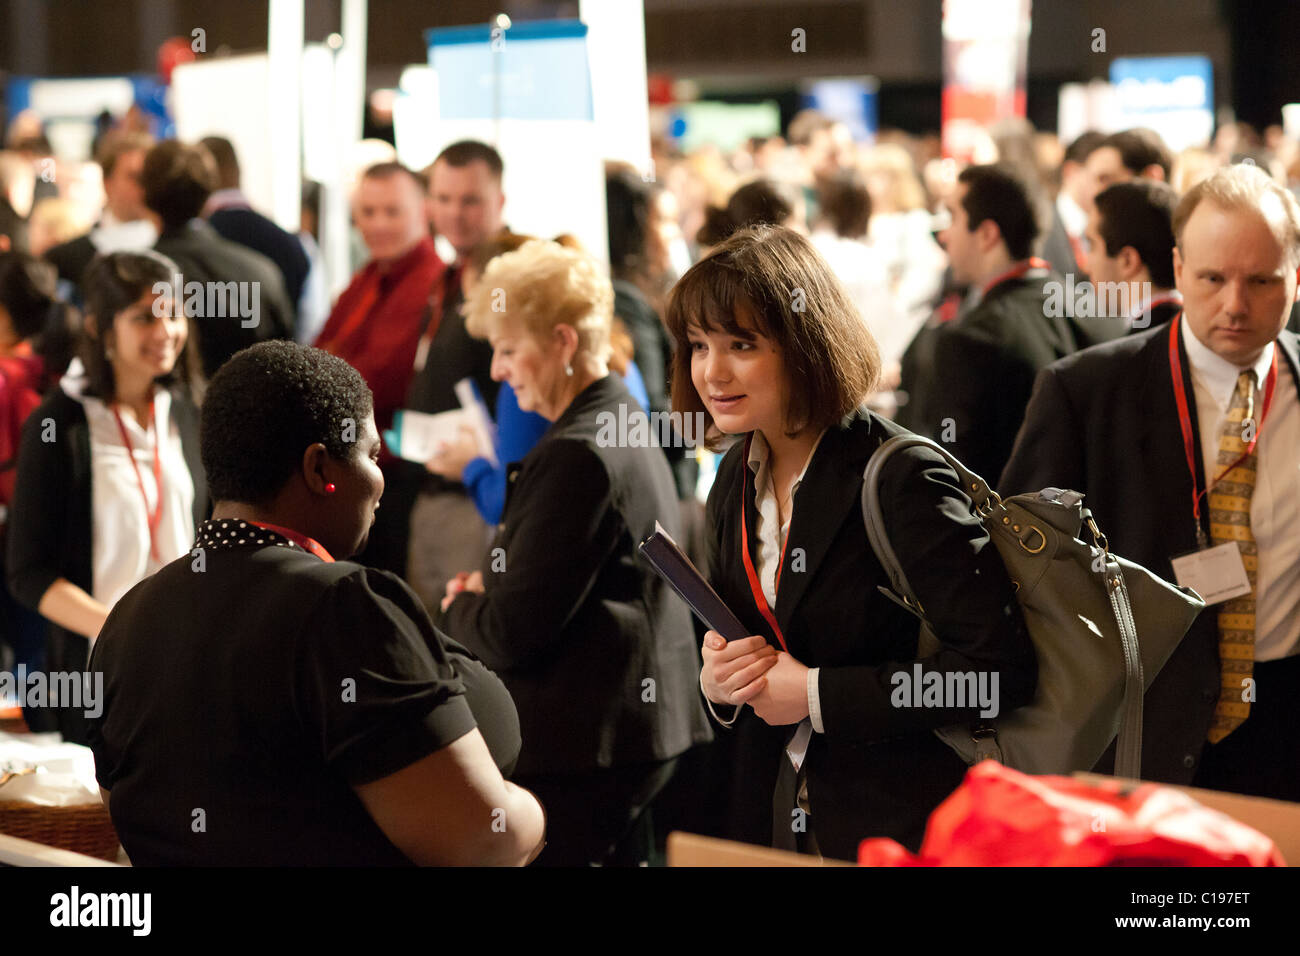 Job seekers attend a career fair held at Madison Square Garden in New York Stock Photo